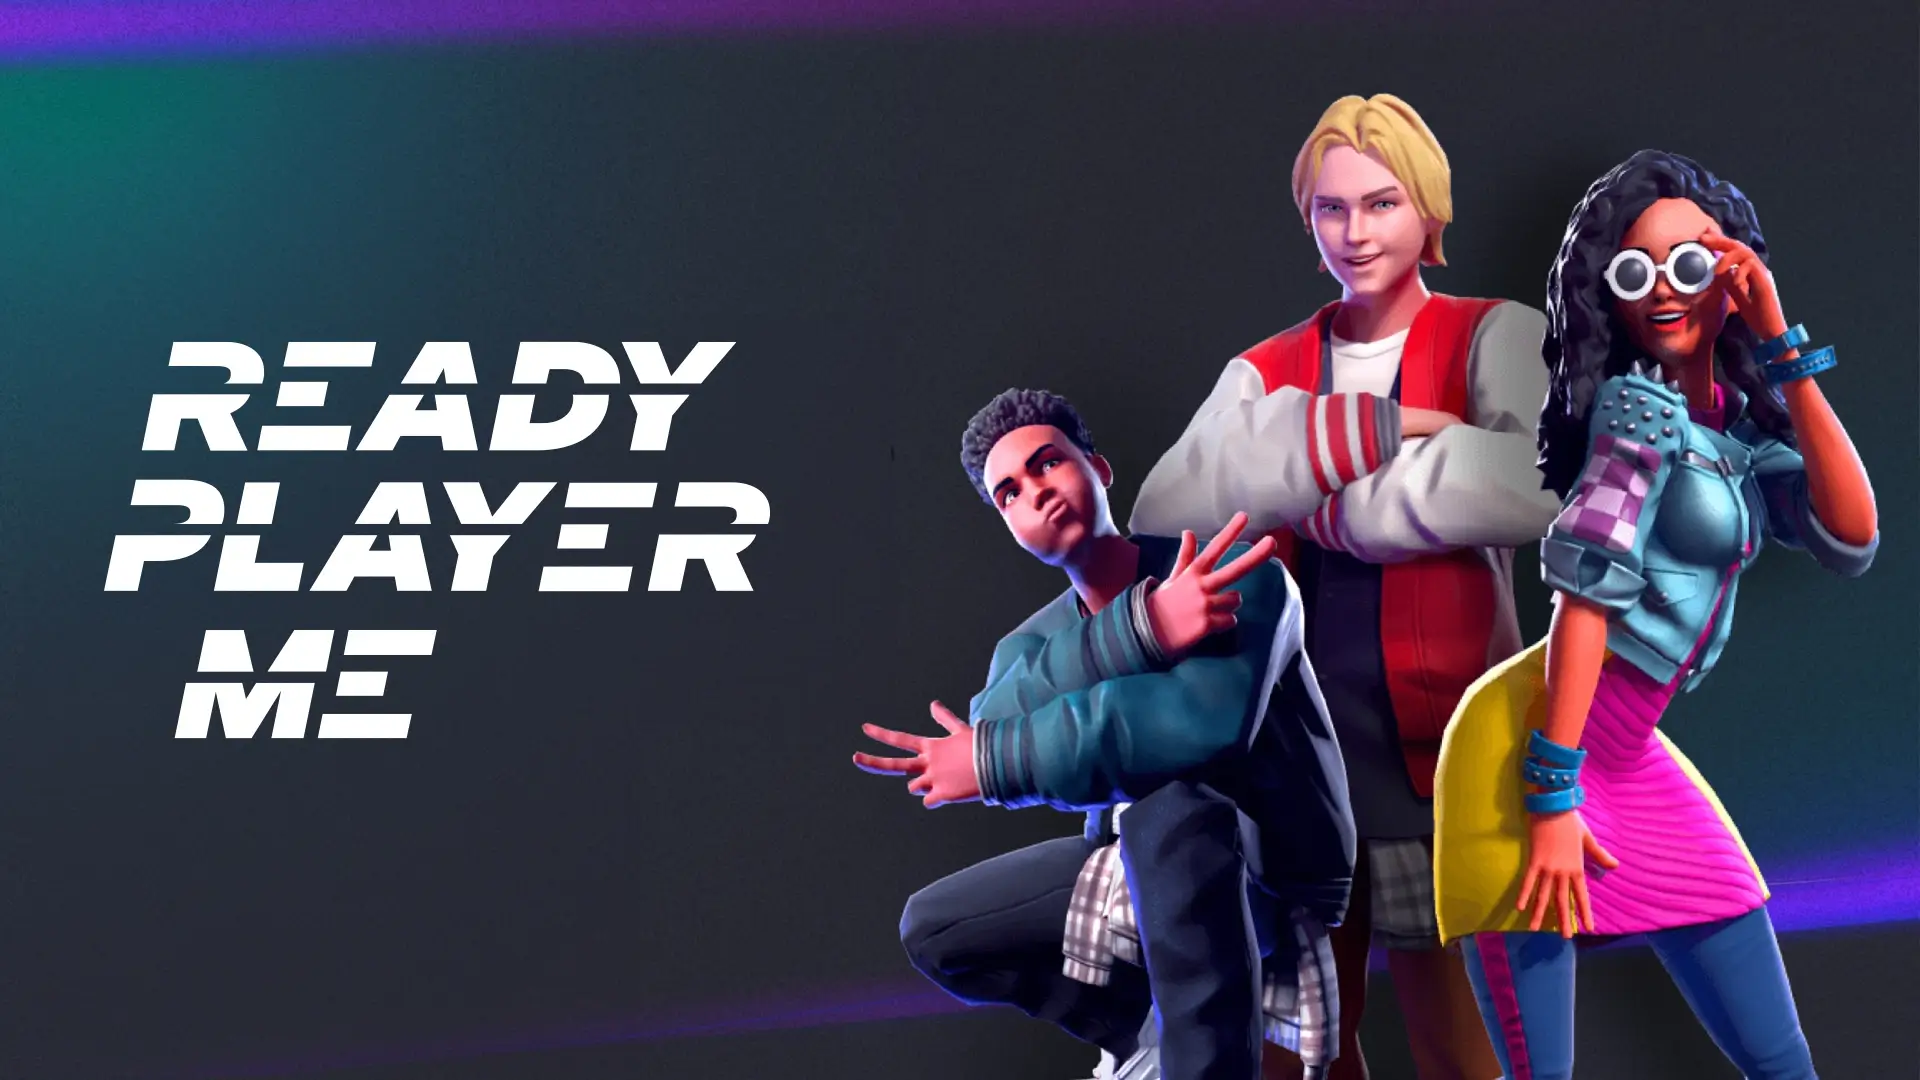 3 cool looking avatars wearing fashionable clothing and posing on the right, and “Ready Player Me”
                        written on the left side of the image.